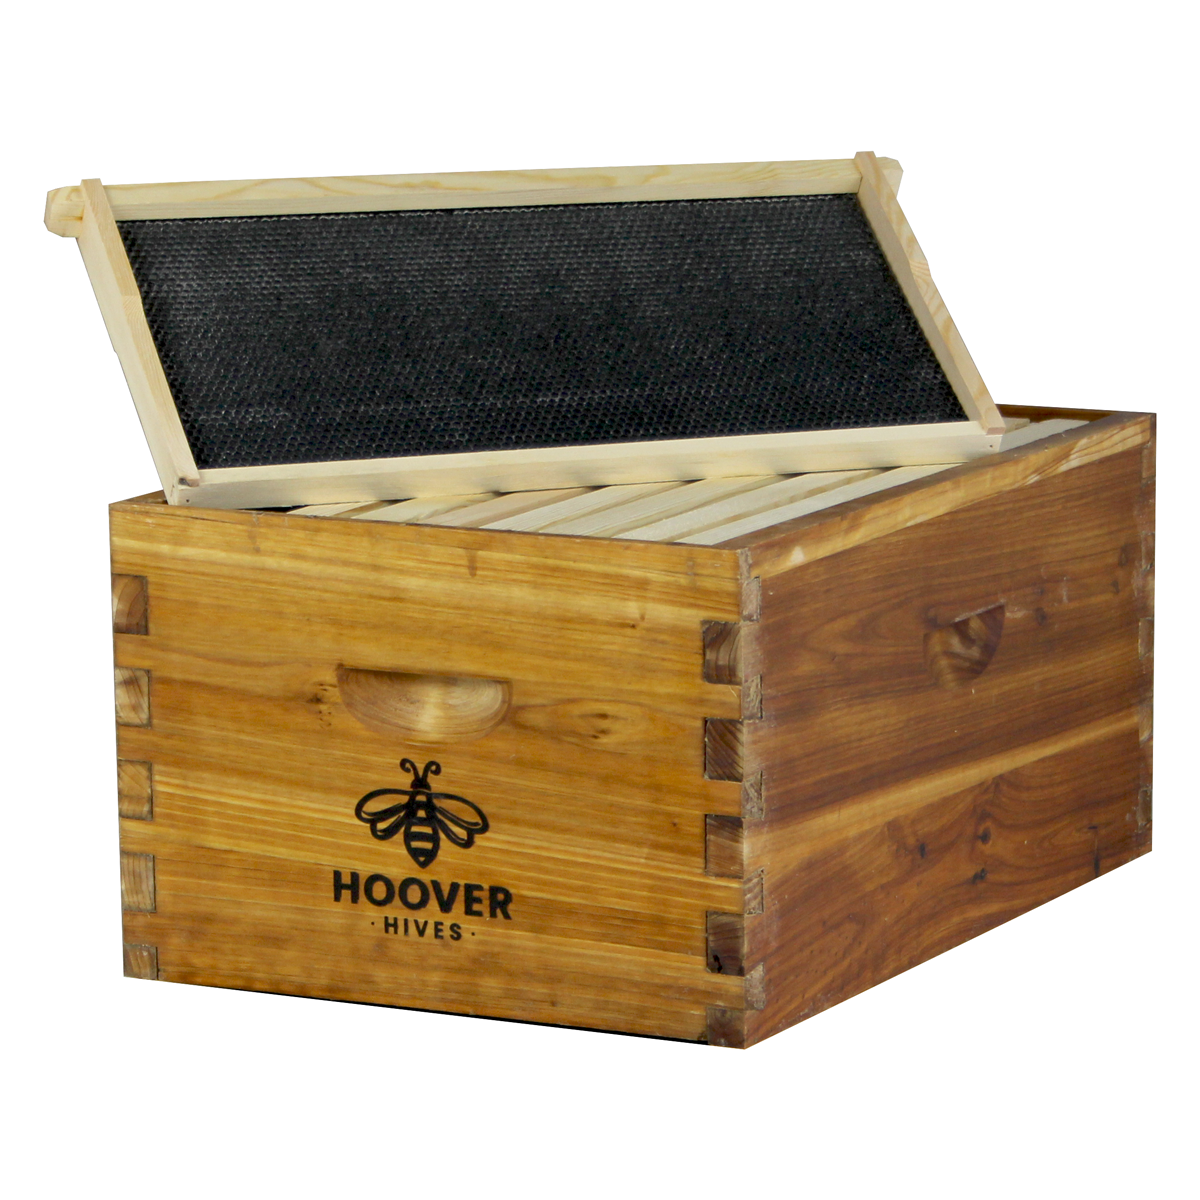 Hoover Hives Wax Coated 8 Frame Deep Brood Box With Frames & Foundations